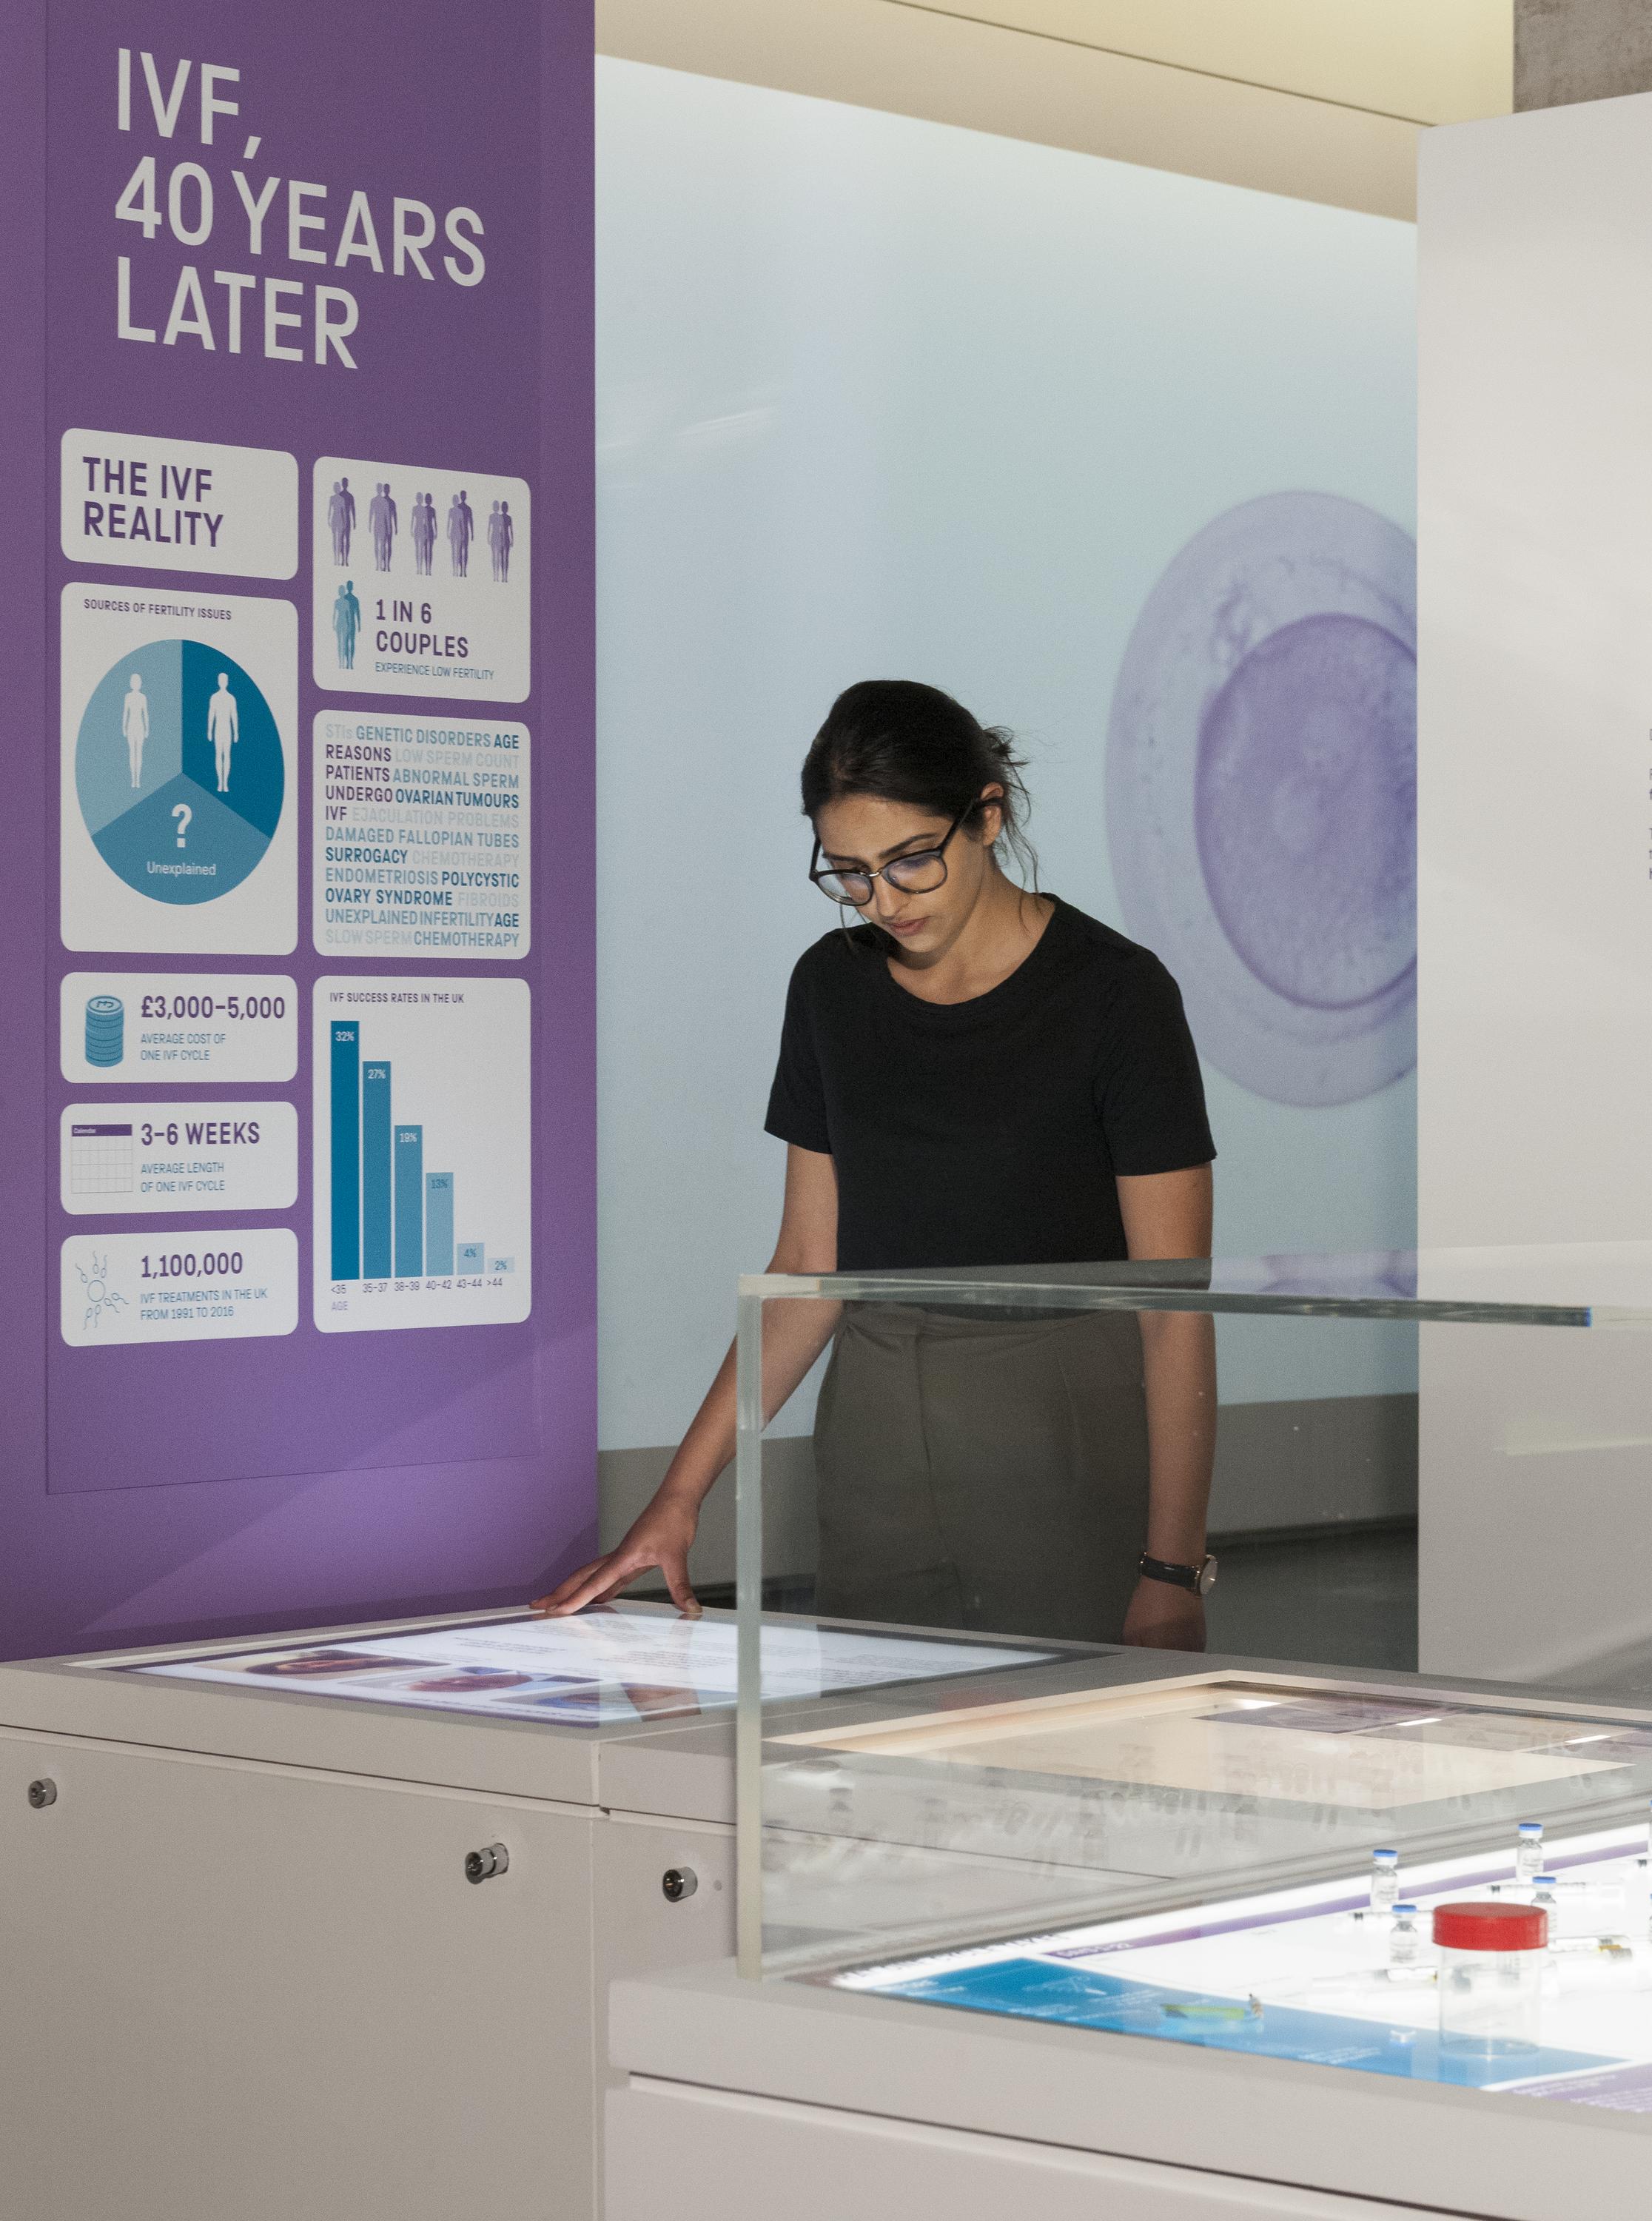 A woman looks at an interactive display at the Science Museum's latest exhibition on the history of IVF